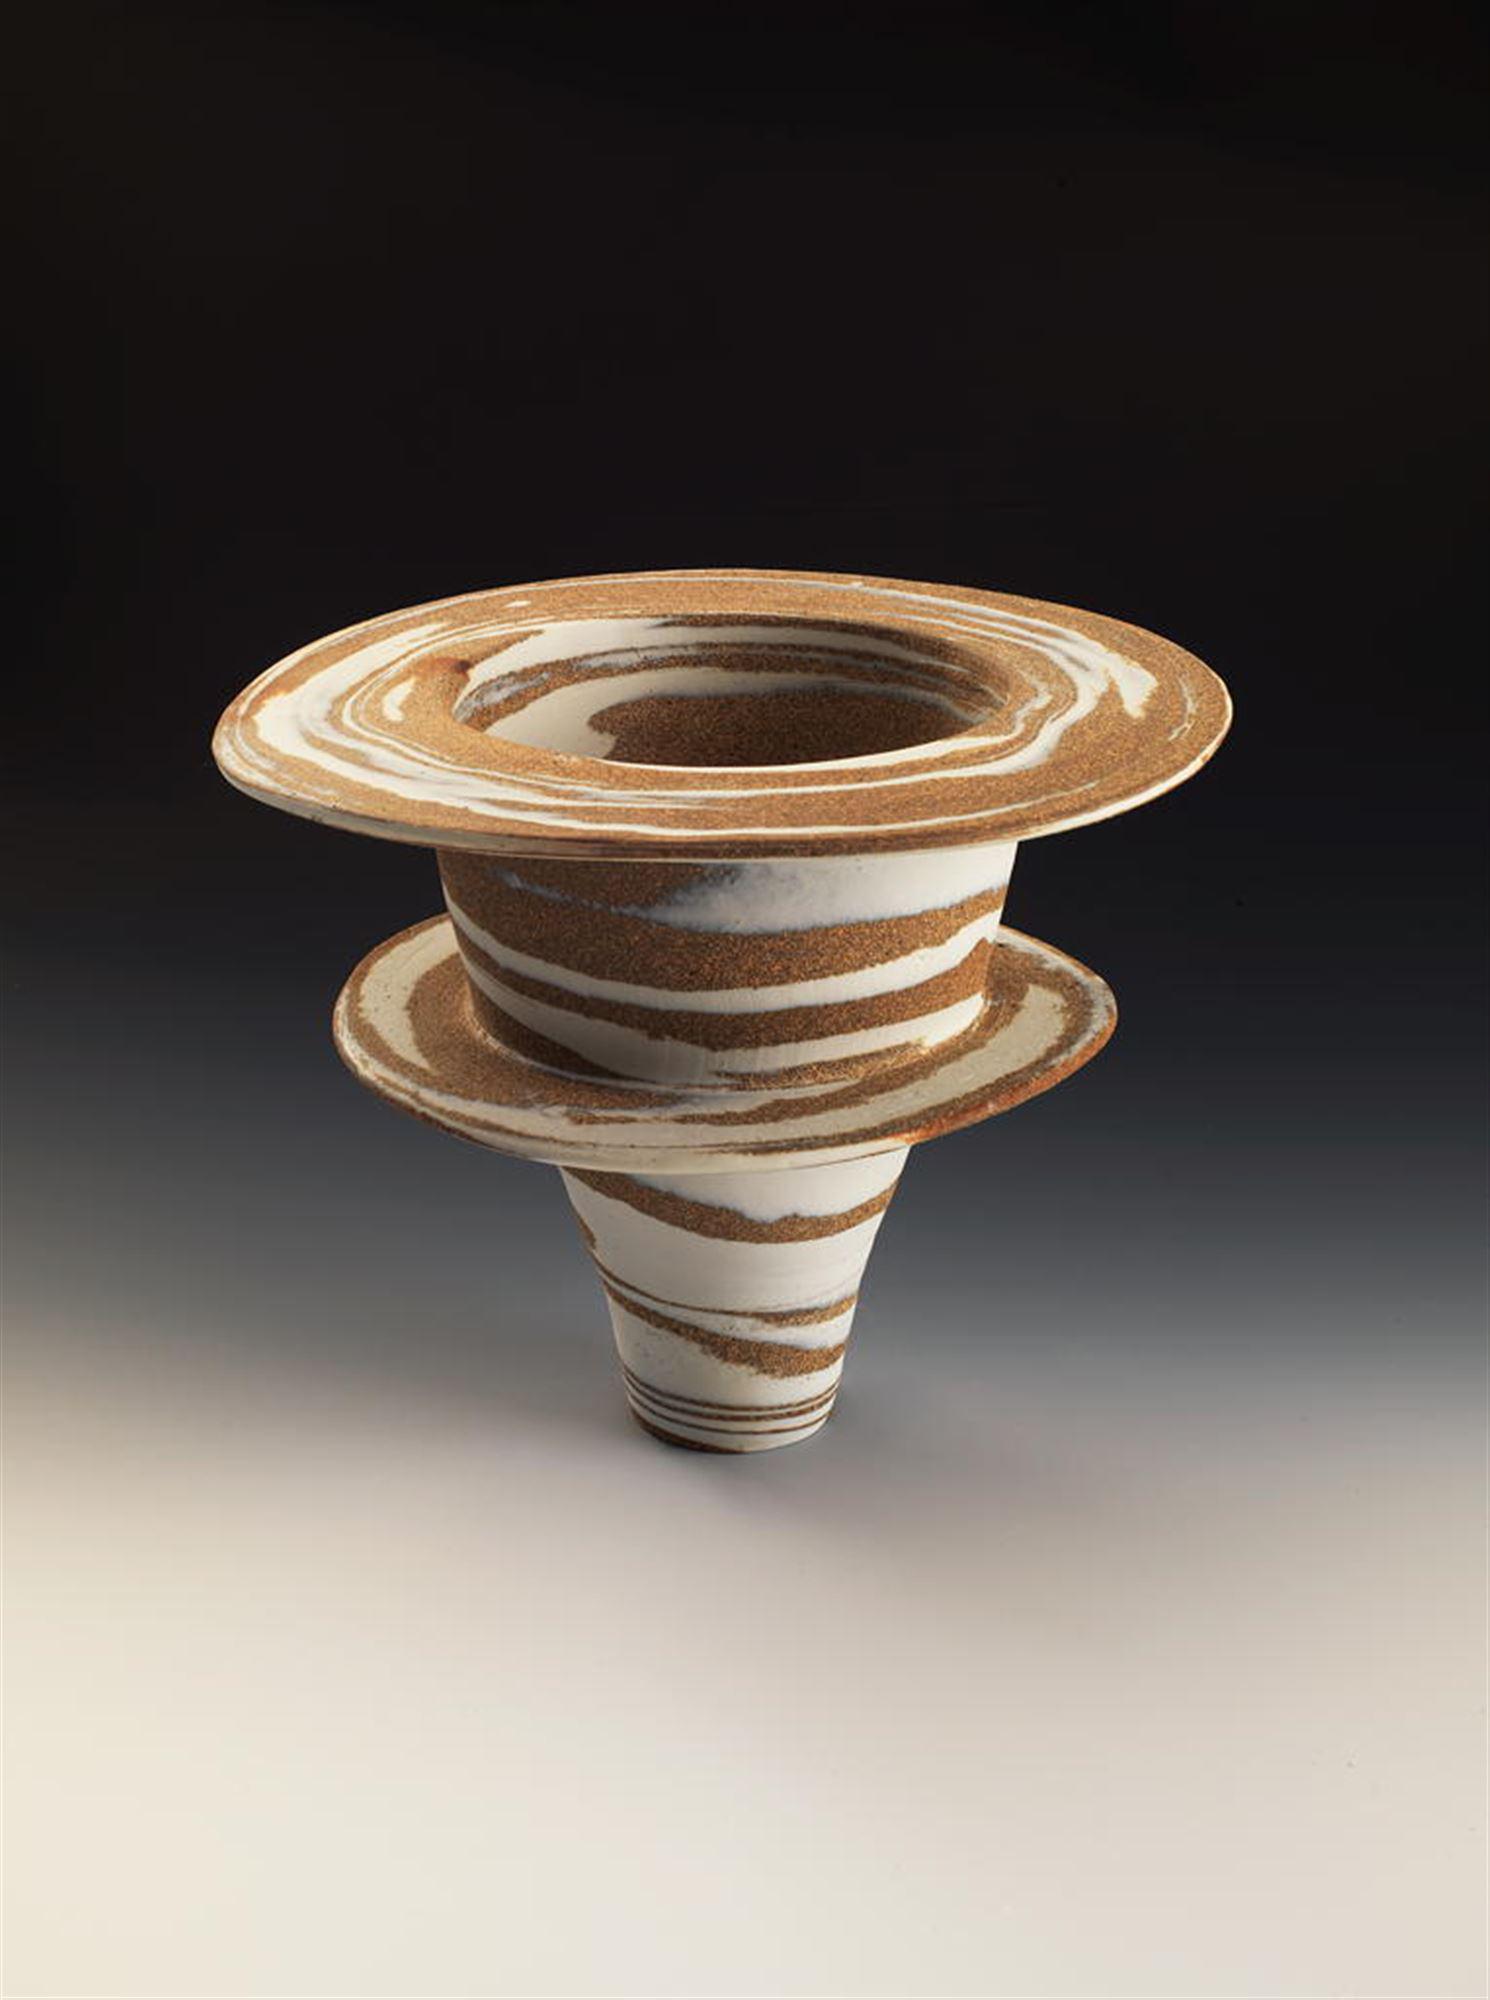 
							

									Lorraine Shemesh									Double Flange Vessel 2015									porcelain and stoneware<br />
8 3/4 x 11 x 11 inches									


							